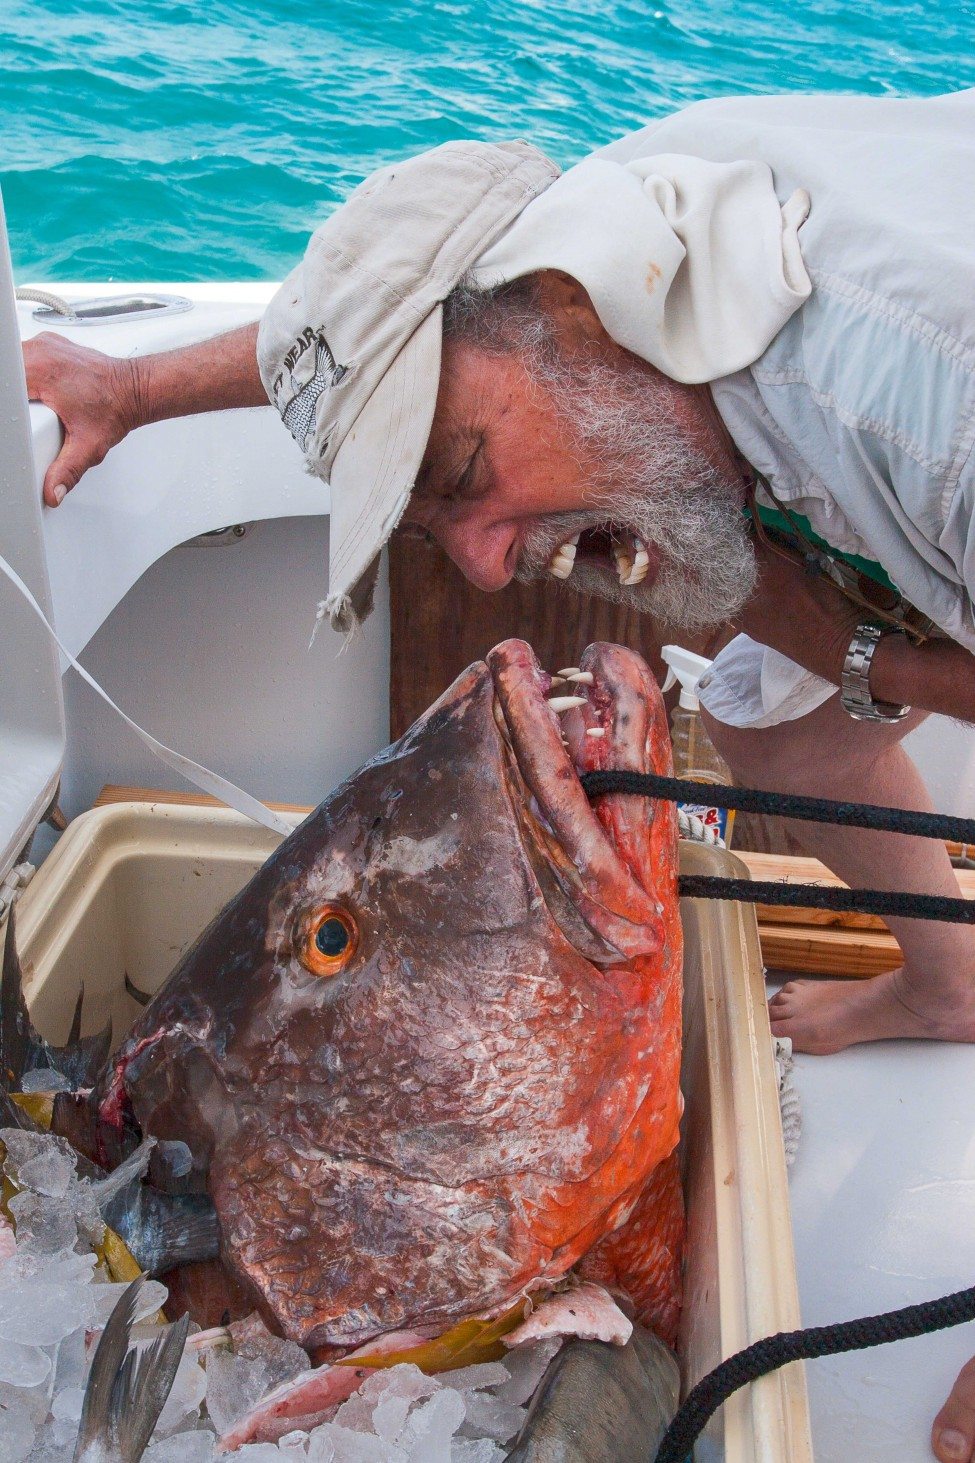 Samuel ‘Doc’ Gruber, the founder of the Shark Lab, gets up close with a snapper.<br />
Photo by Matthew Potenski